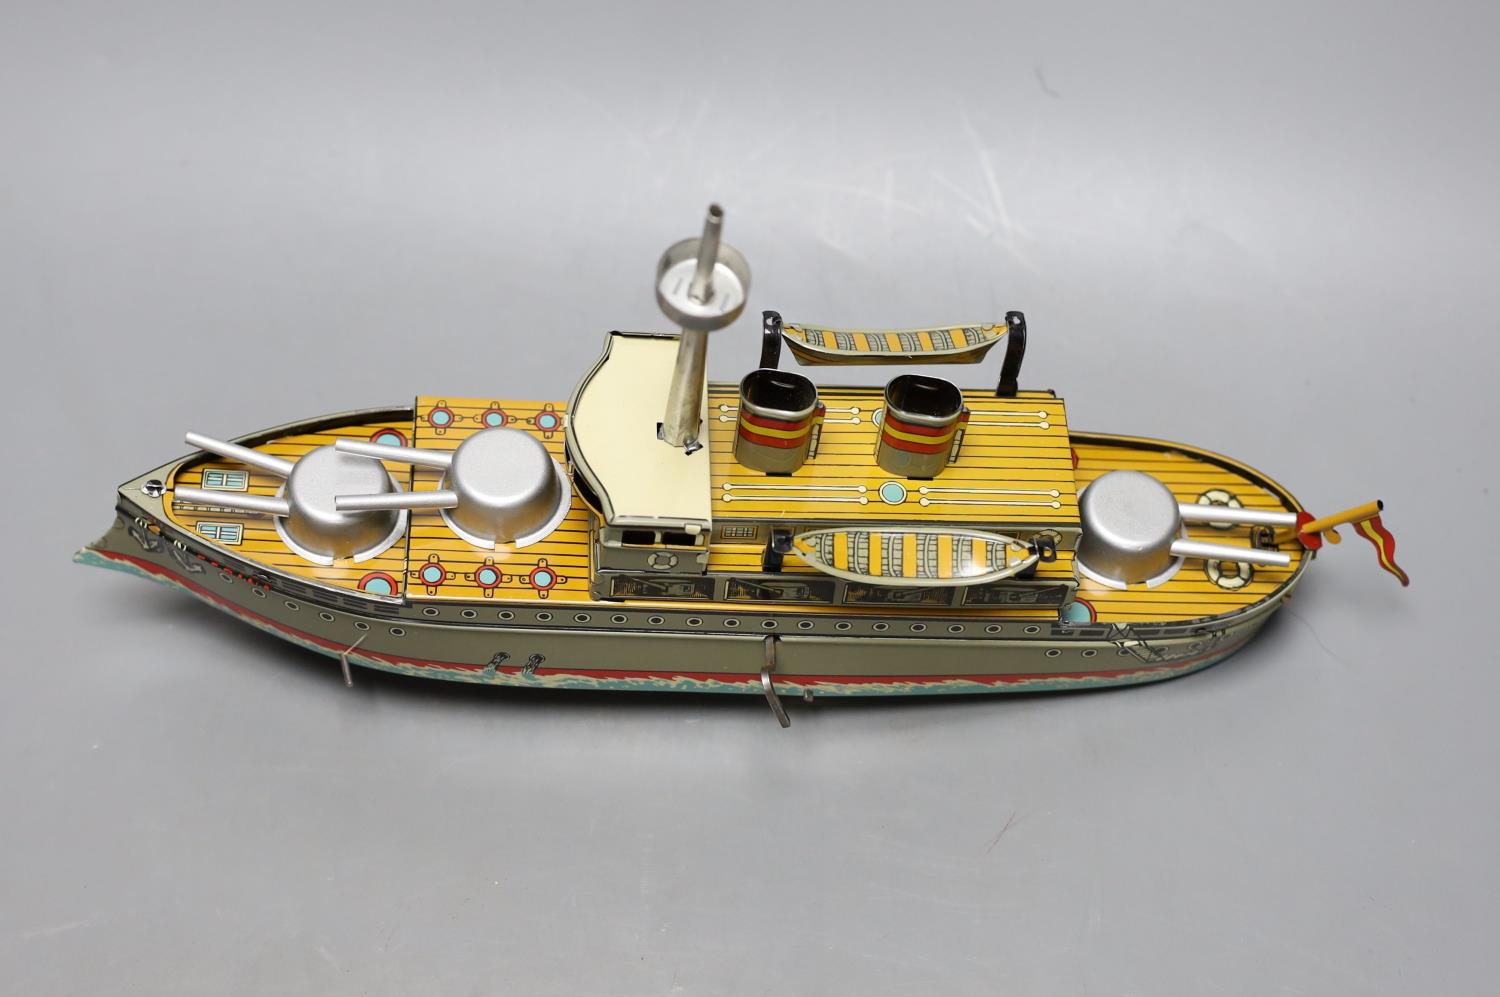 Three IBA tinplate boxed toys, two boats and a train,largest boat 42 cms wide. - Image 2 of 5